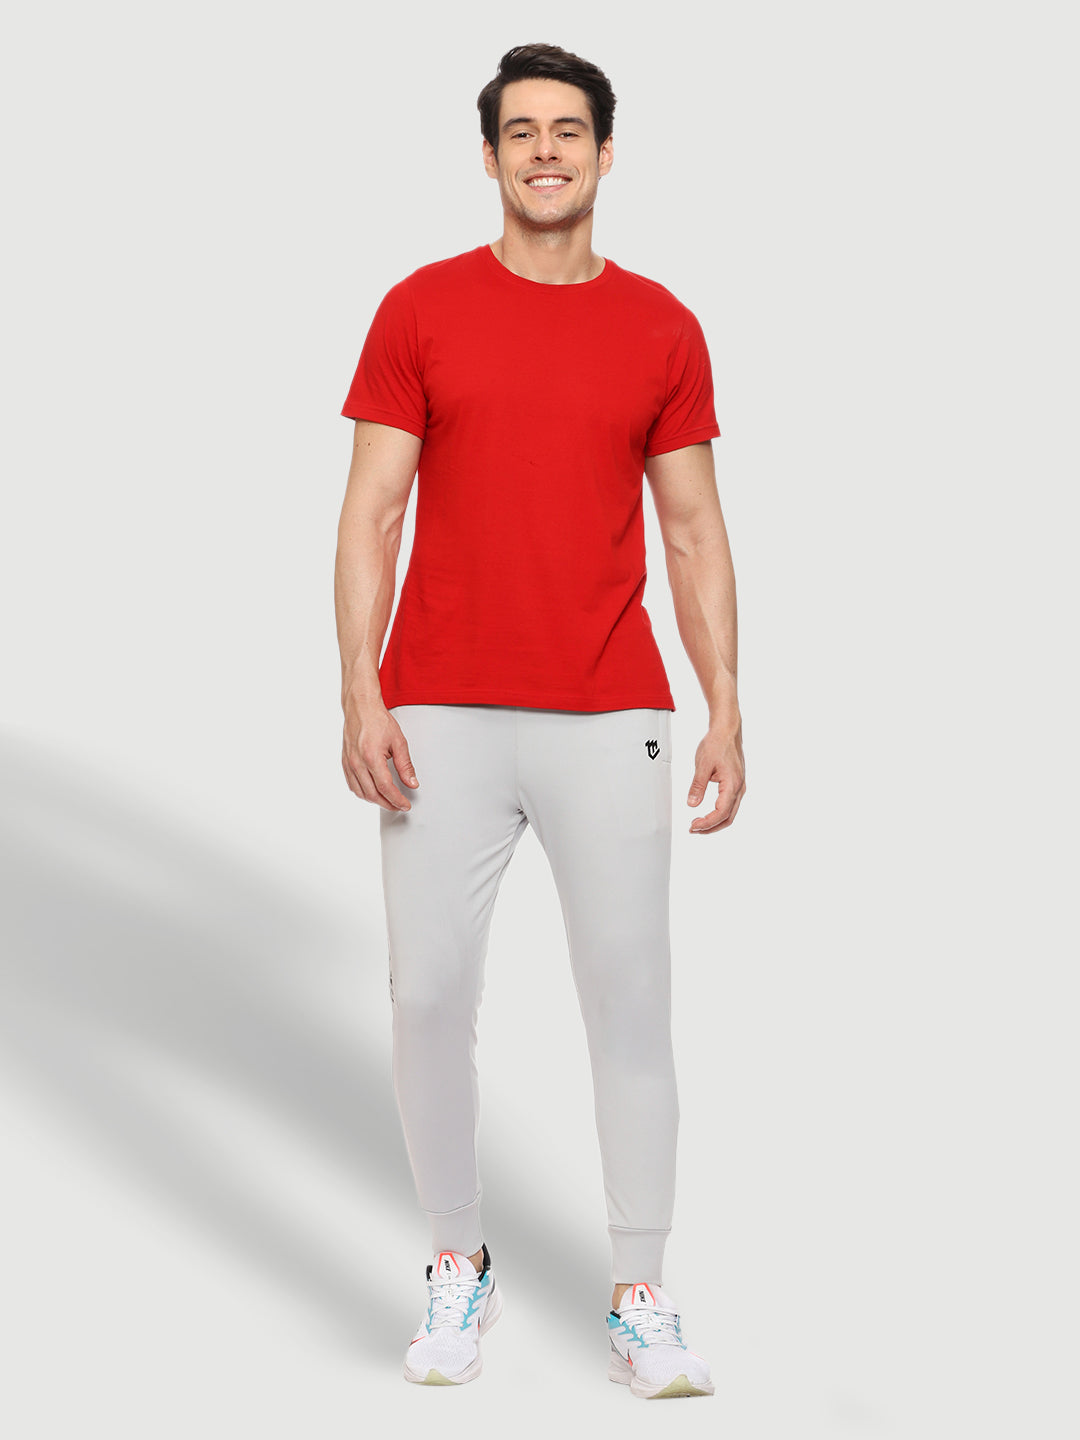 Rapid Dry Grey Solid Track Pant for Men